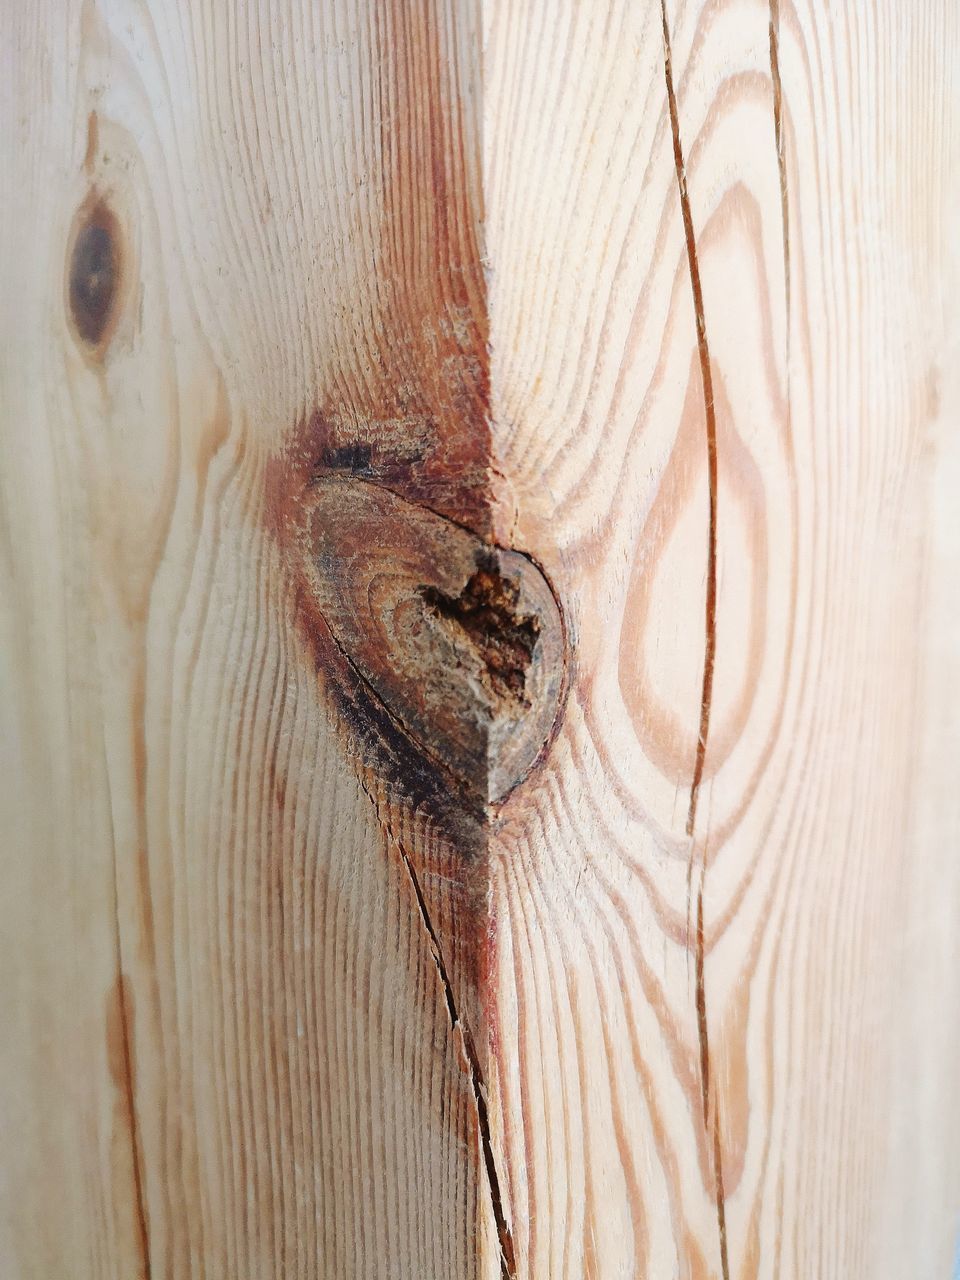 FULL FRAME SHOT OF WOOD WITH WOODEN